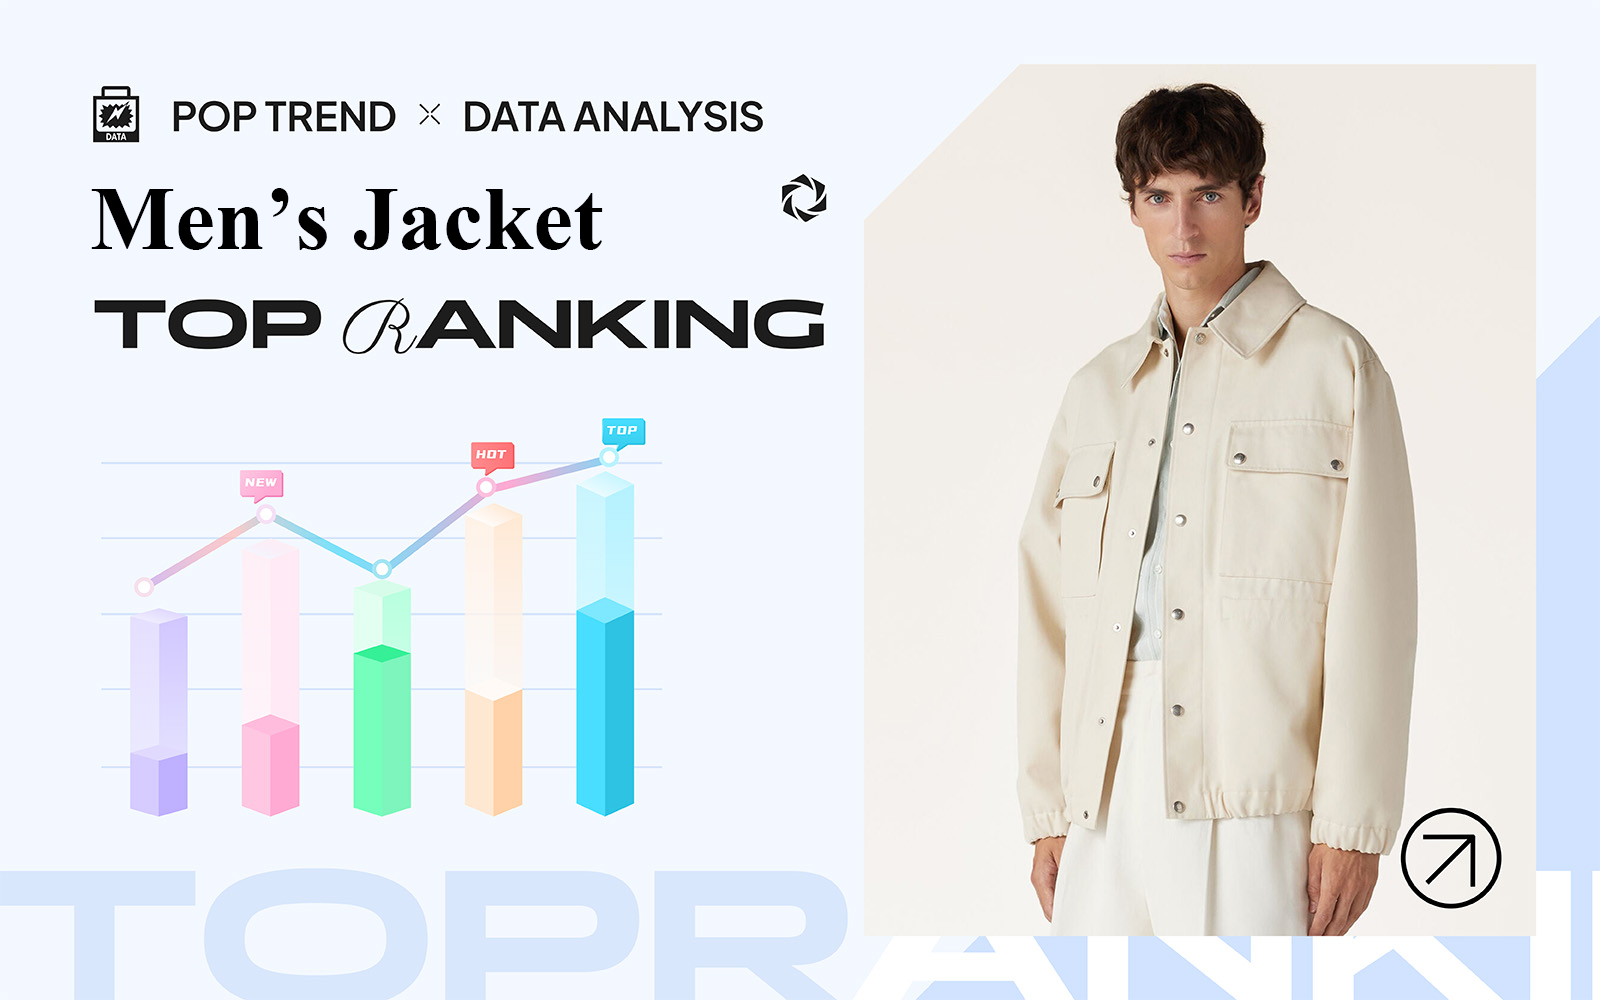 Jackets -- The TOP Ranking of Menswear